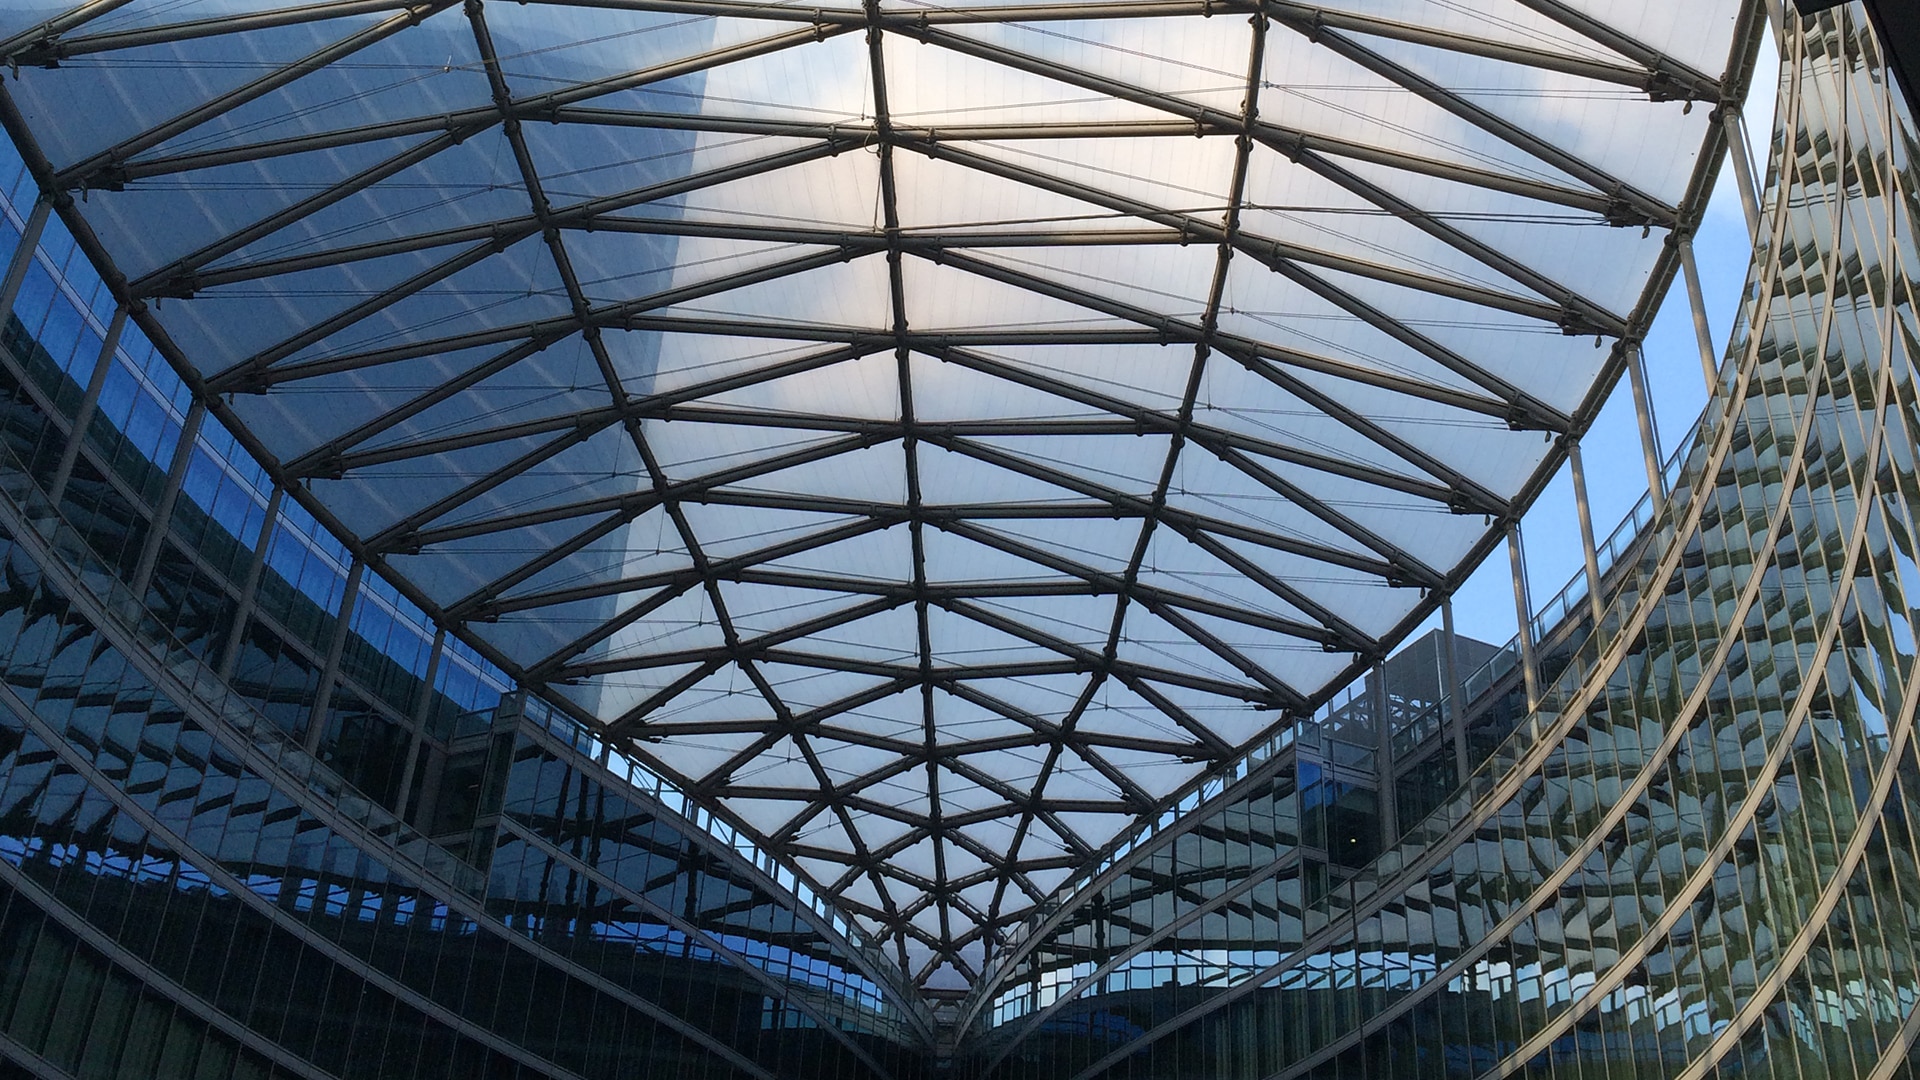 174 Texlon® ETFE cushions provide solar control and enhanced thermal performance at Palazzo Lomardia office complex in Milan, Italy.